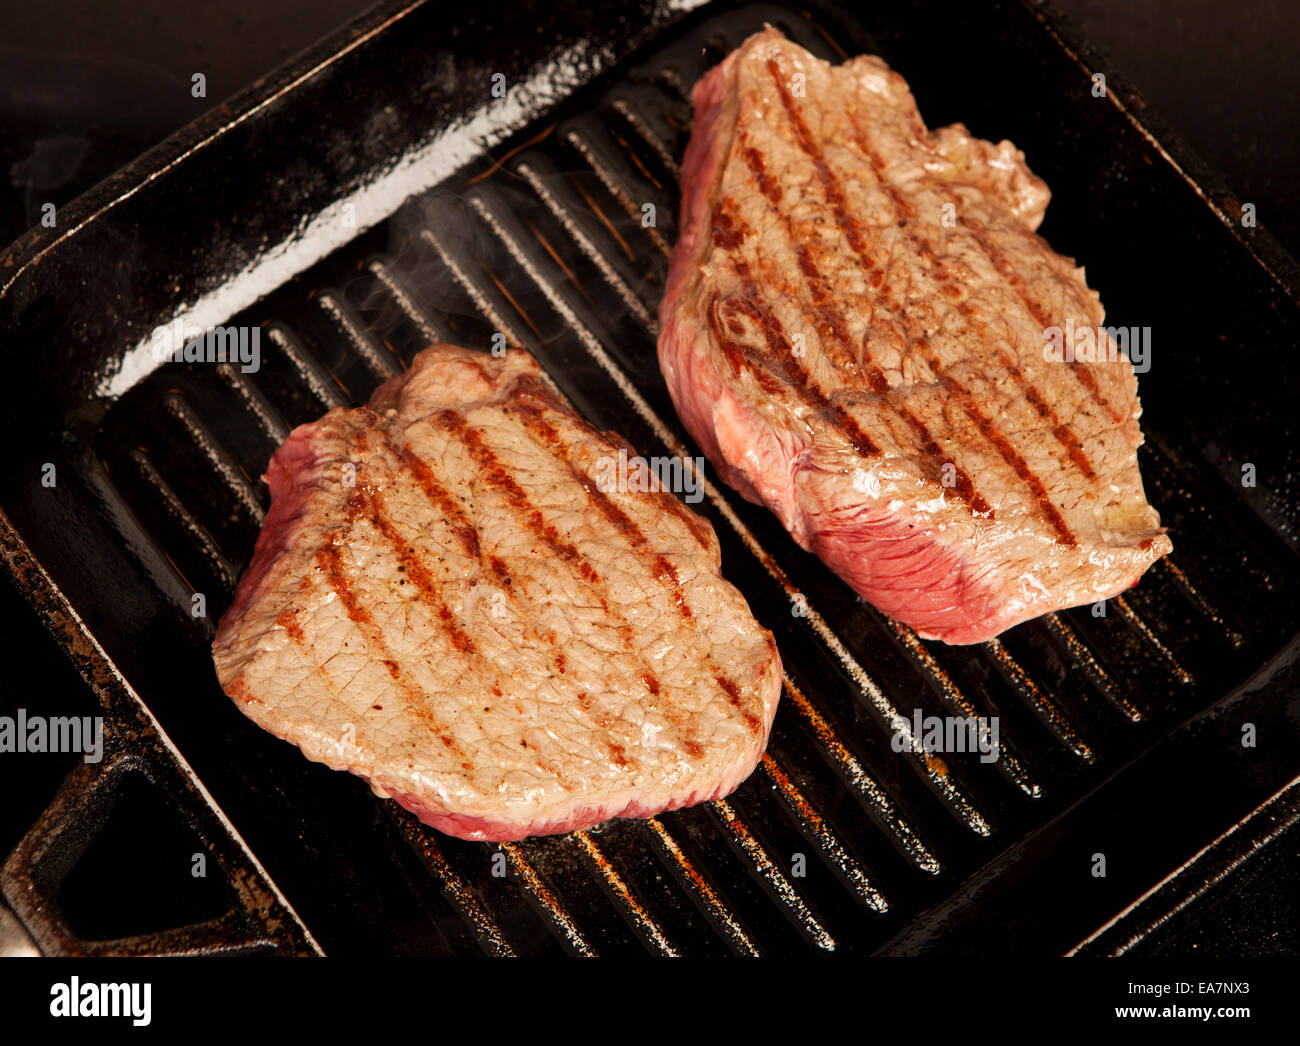 two large slices of beef roast in cast iron pan Stock Photo